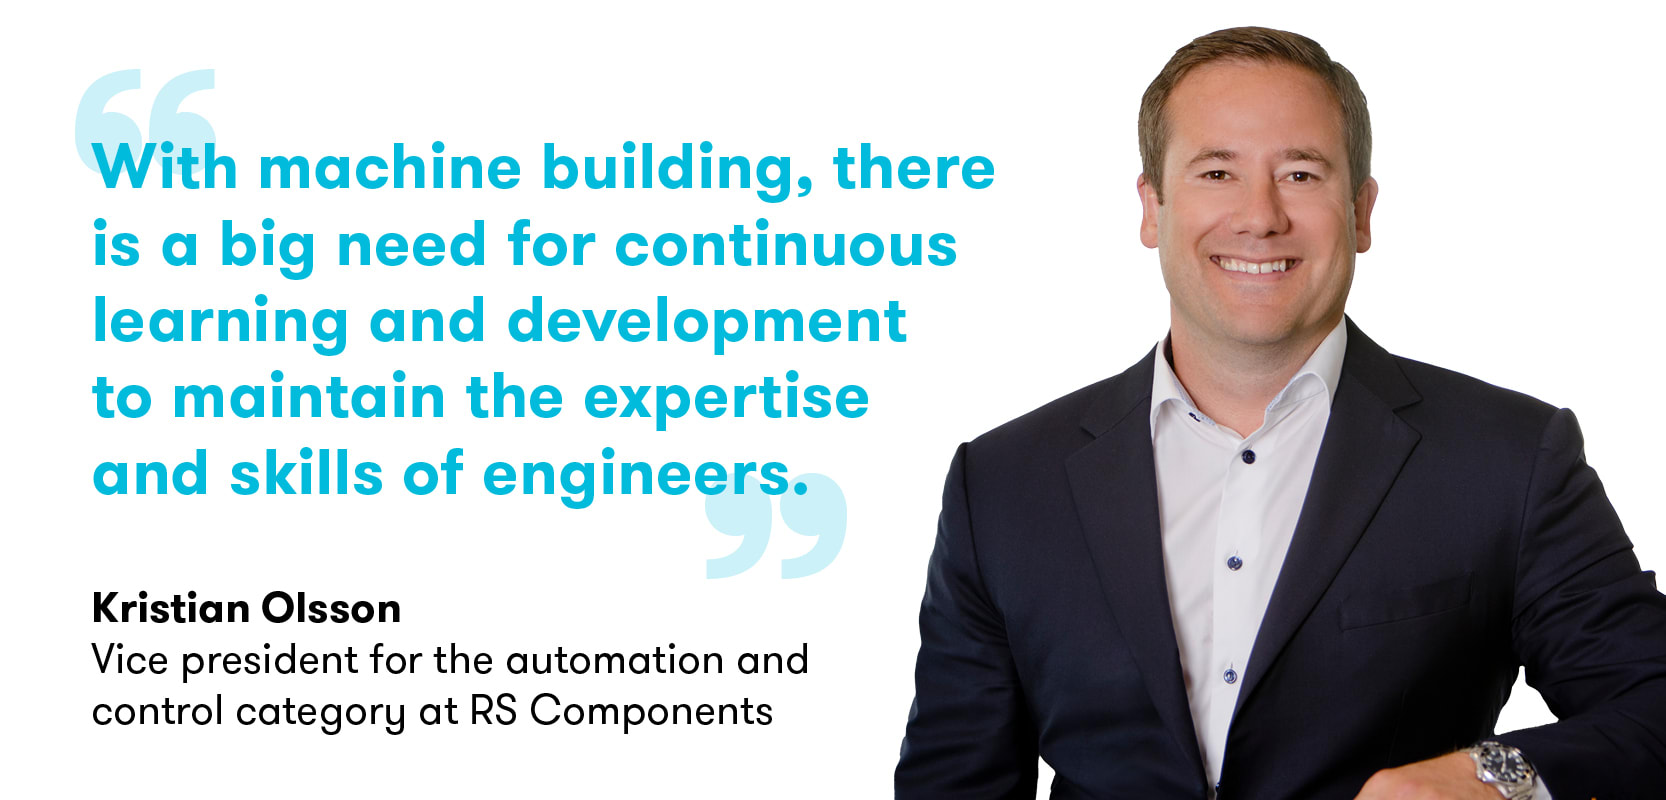 Kristian Olsson Vice president for the automation and control category at RS Components